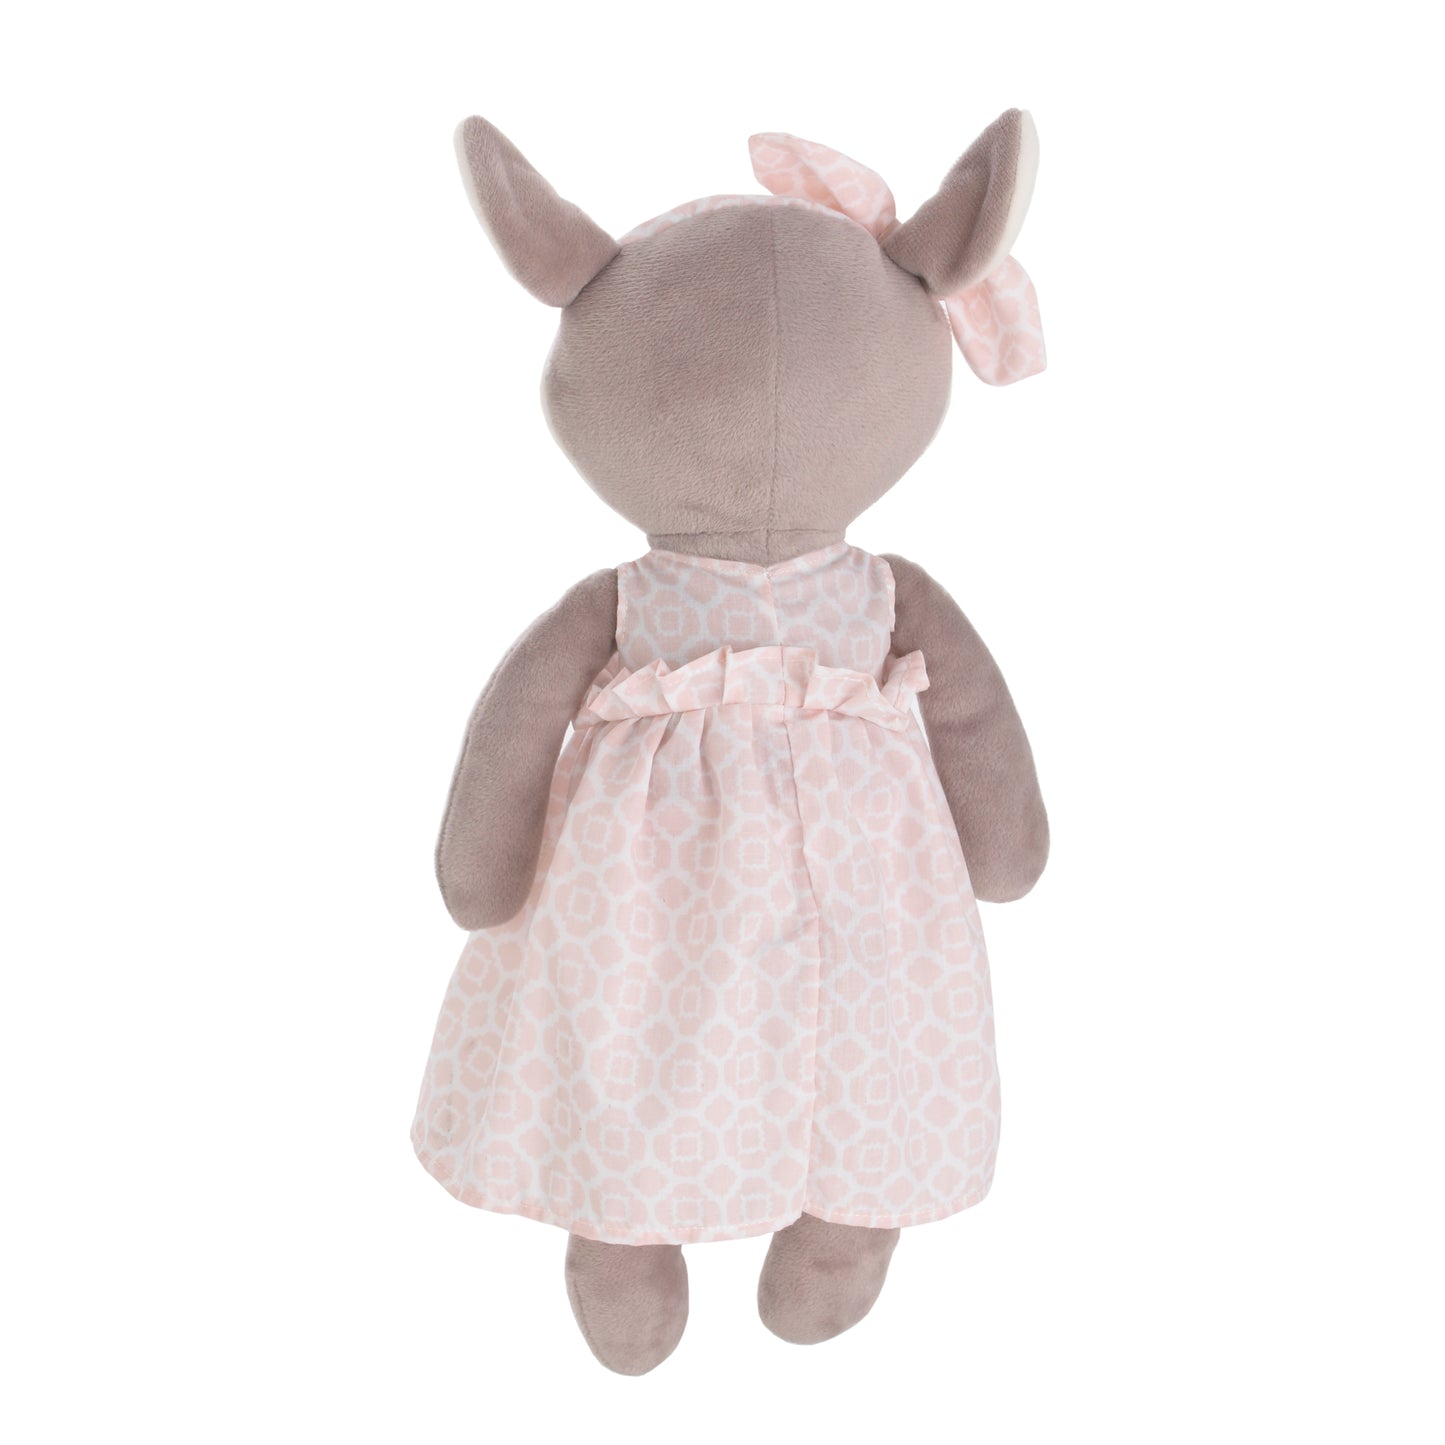 NoJo Countryside Floral - Grey, Ivory and Pink Plush Deer Toy